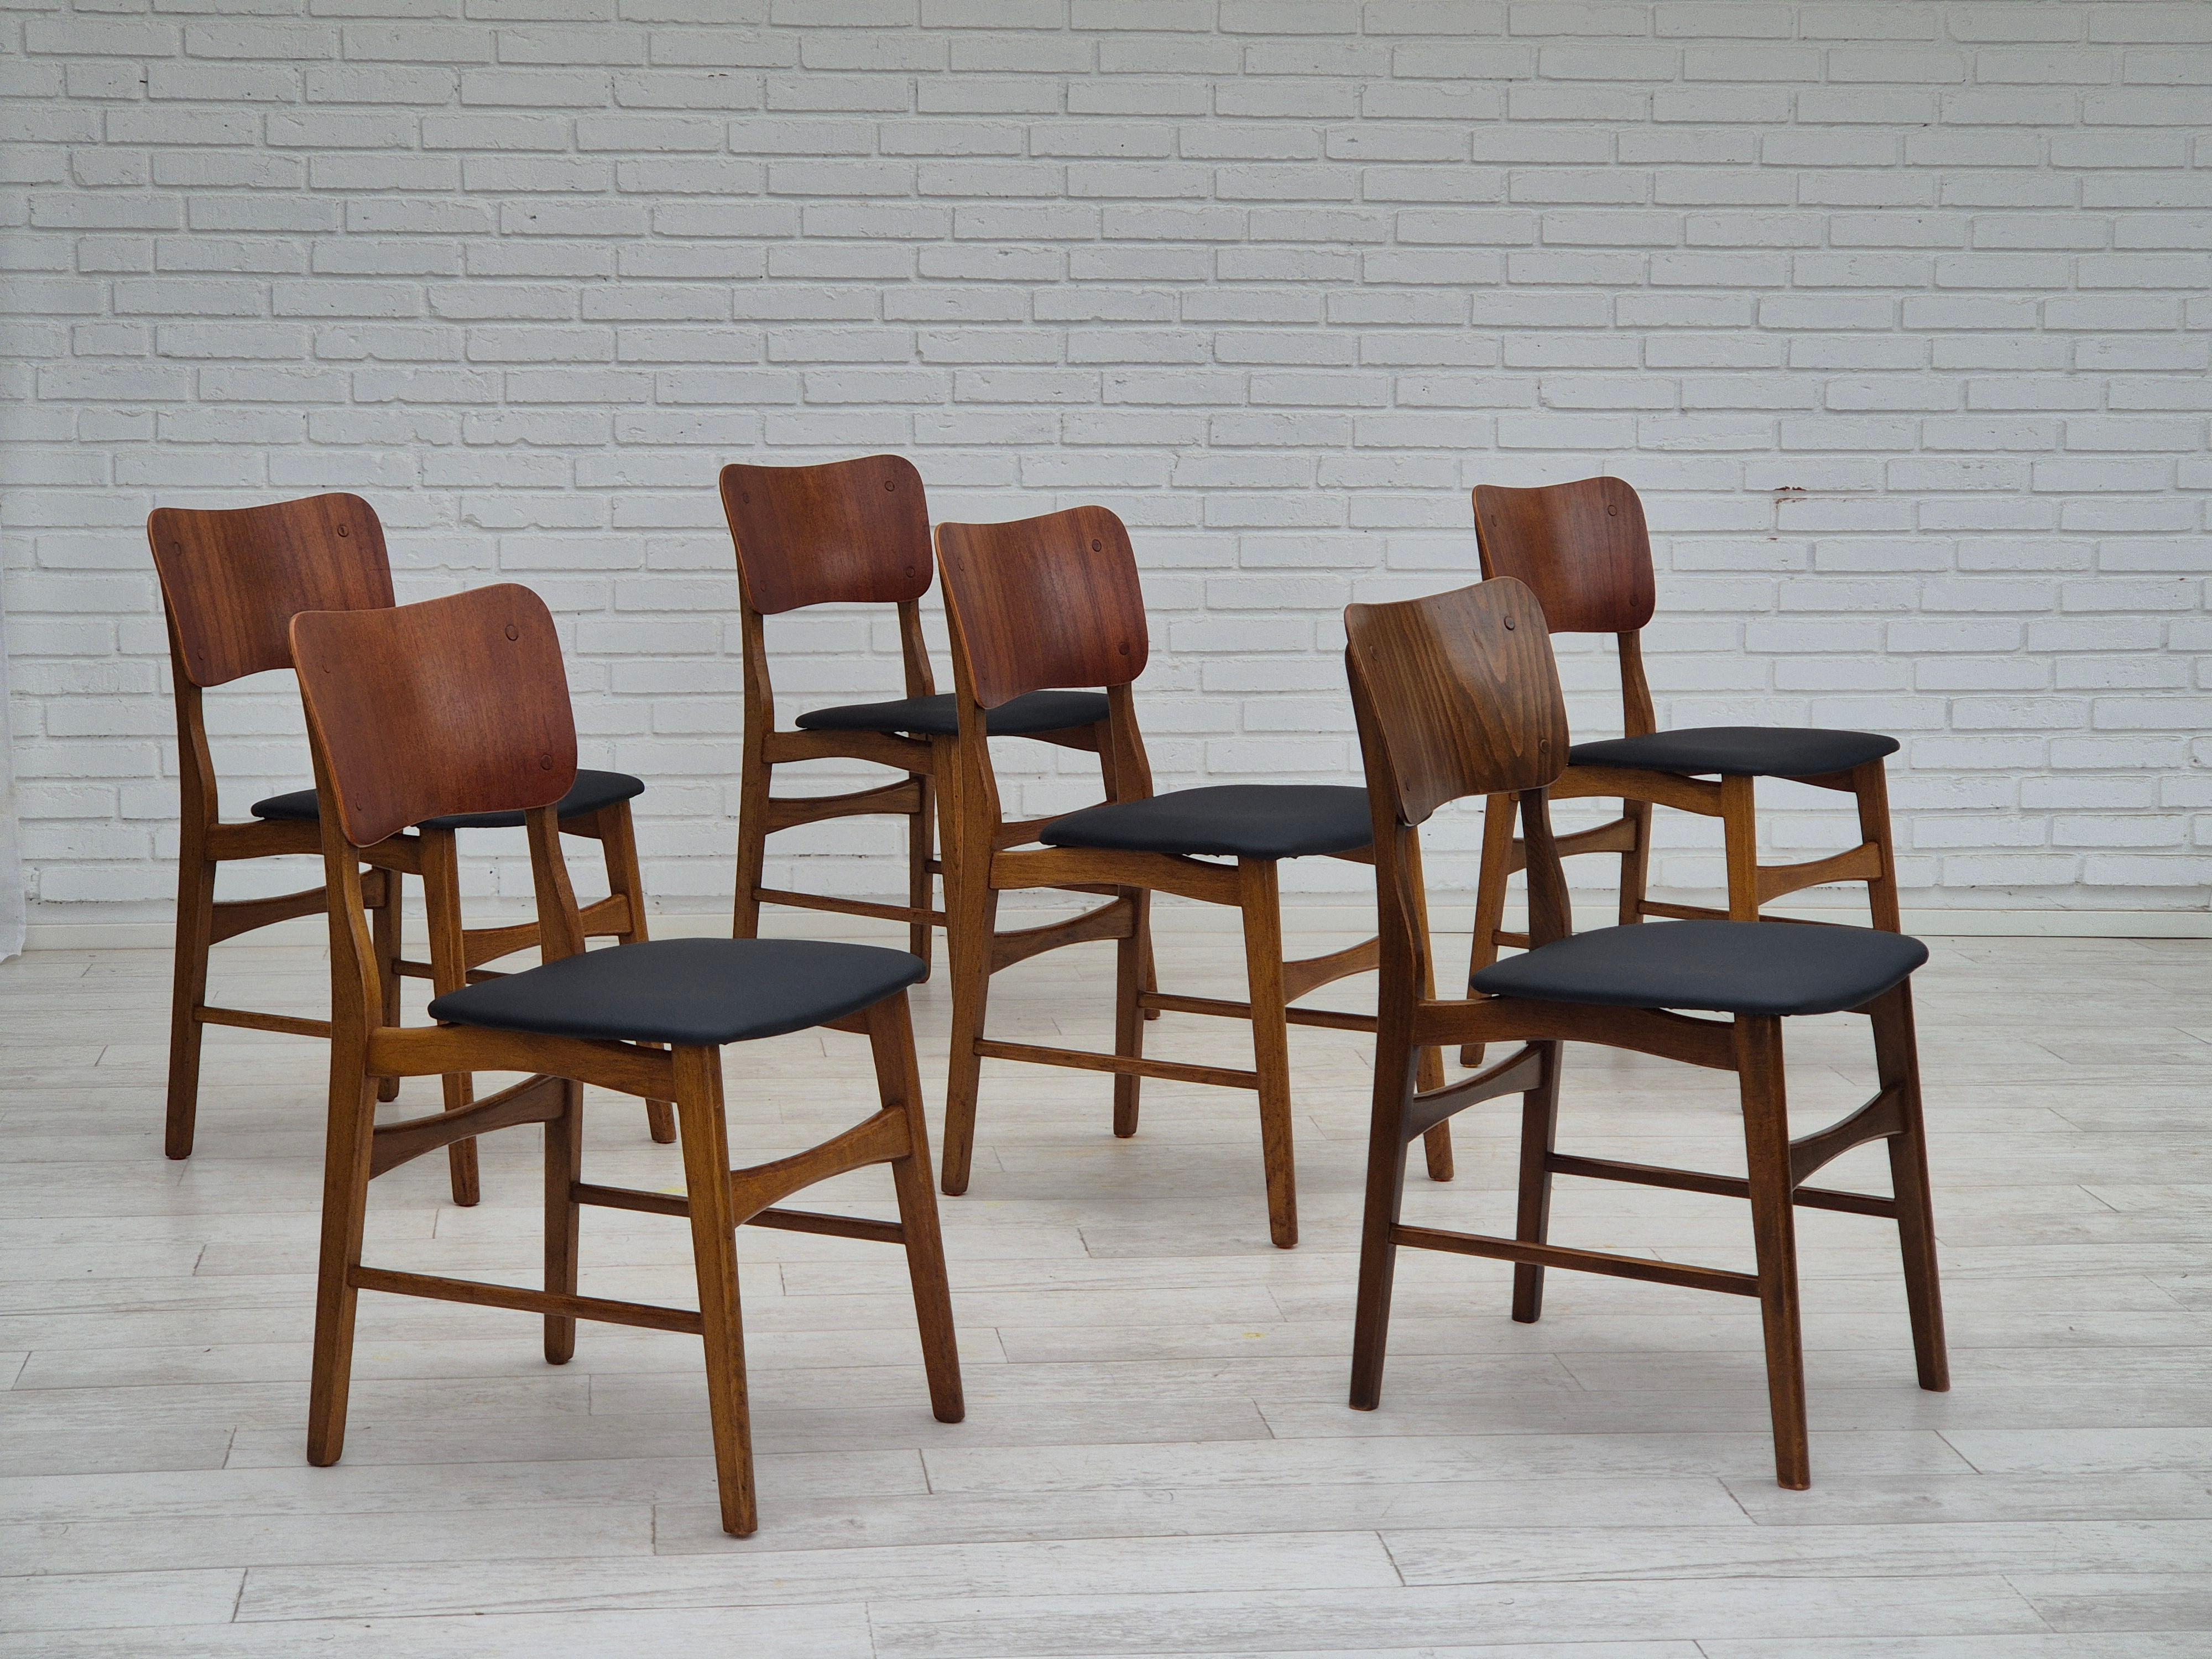 1960s, Danish design by Ib Kofod Larsen for Christensen & Larsen. Set of 6 new reupholstered dining chairs. Oak and teak wood. Reupholstered in quality artificial leather. Wood renewed. Manufactured by Danish furniture manufacturer in about 1960s.